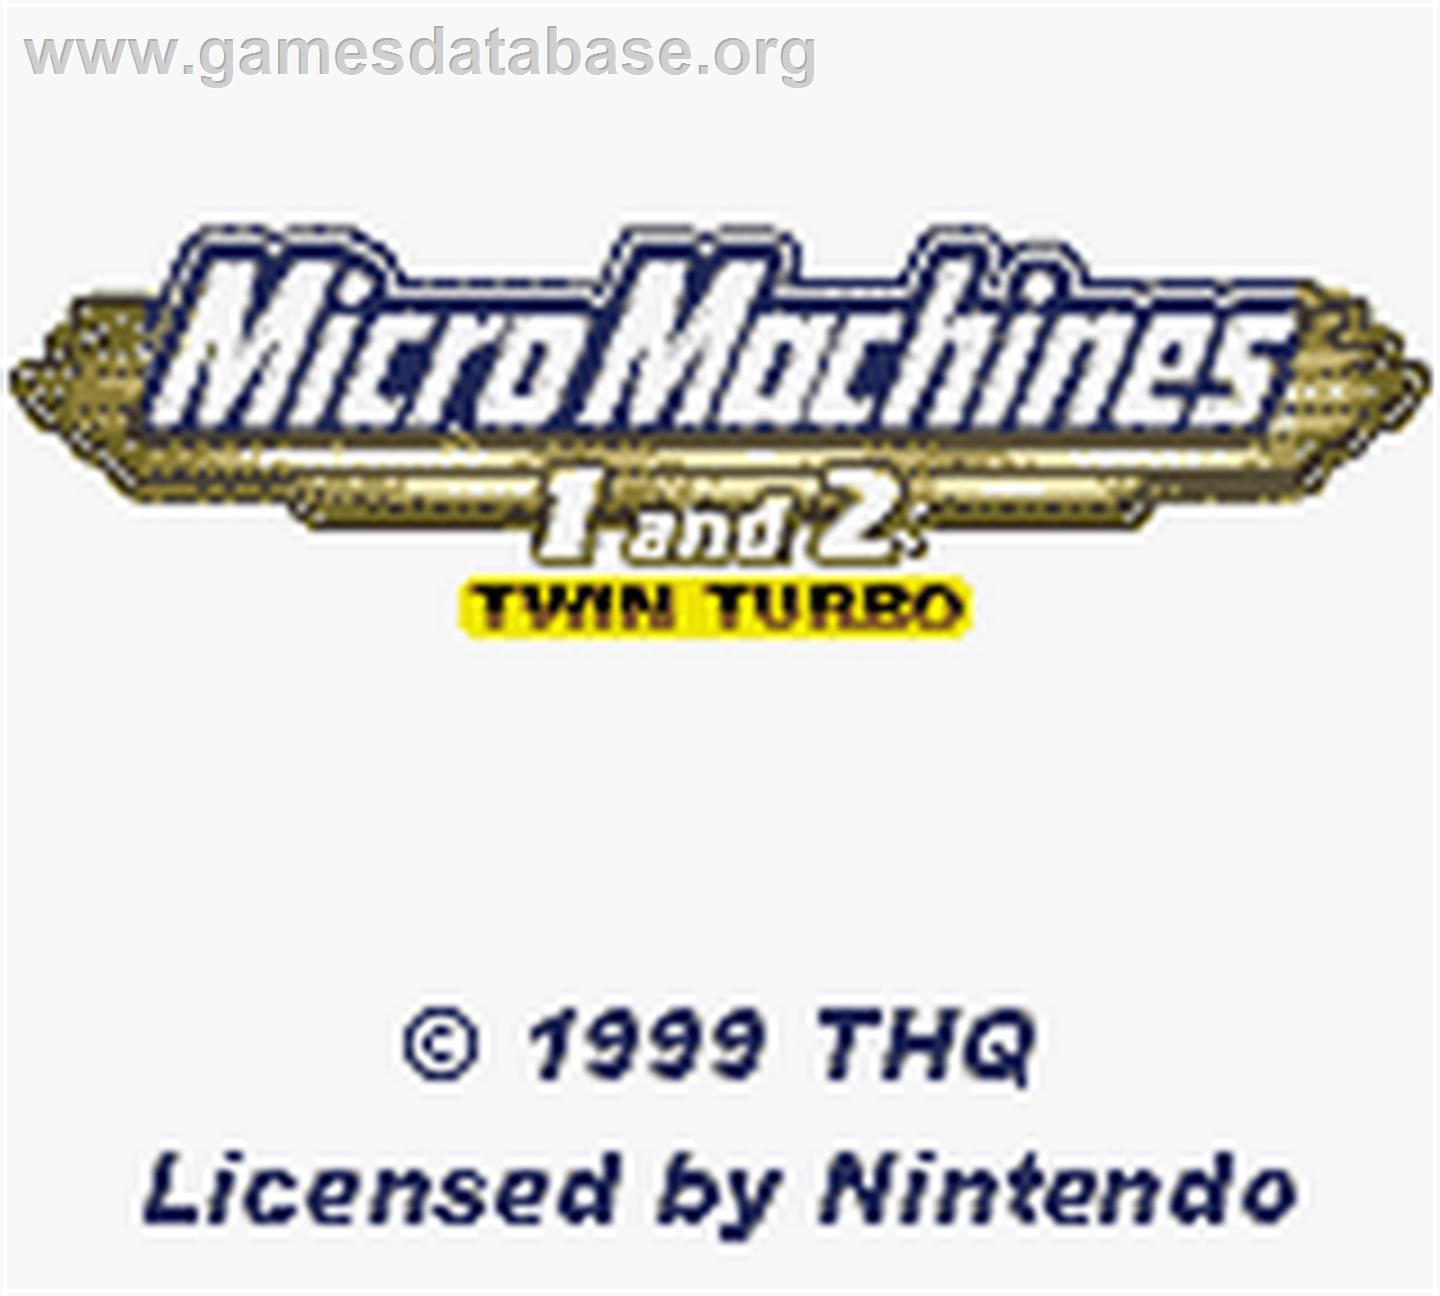 Micro Machines 1 and 2: Twin Turbo - Nintendo Game Boy Color - Artwork - Title Screen